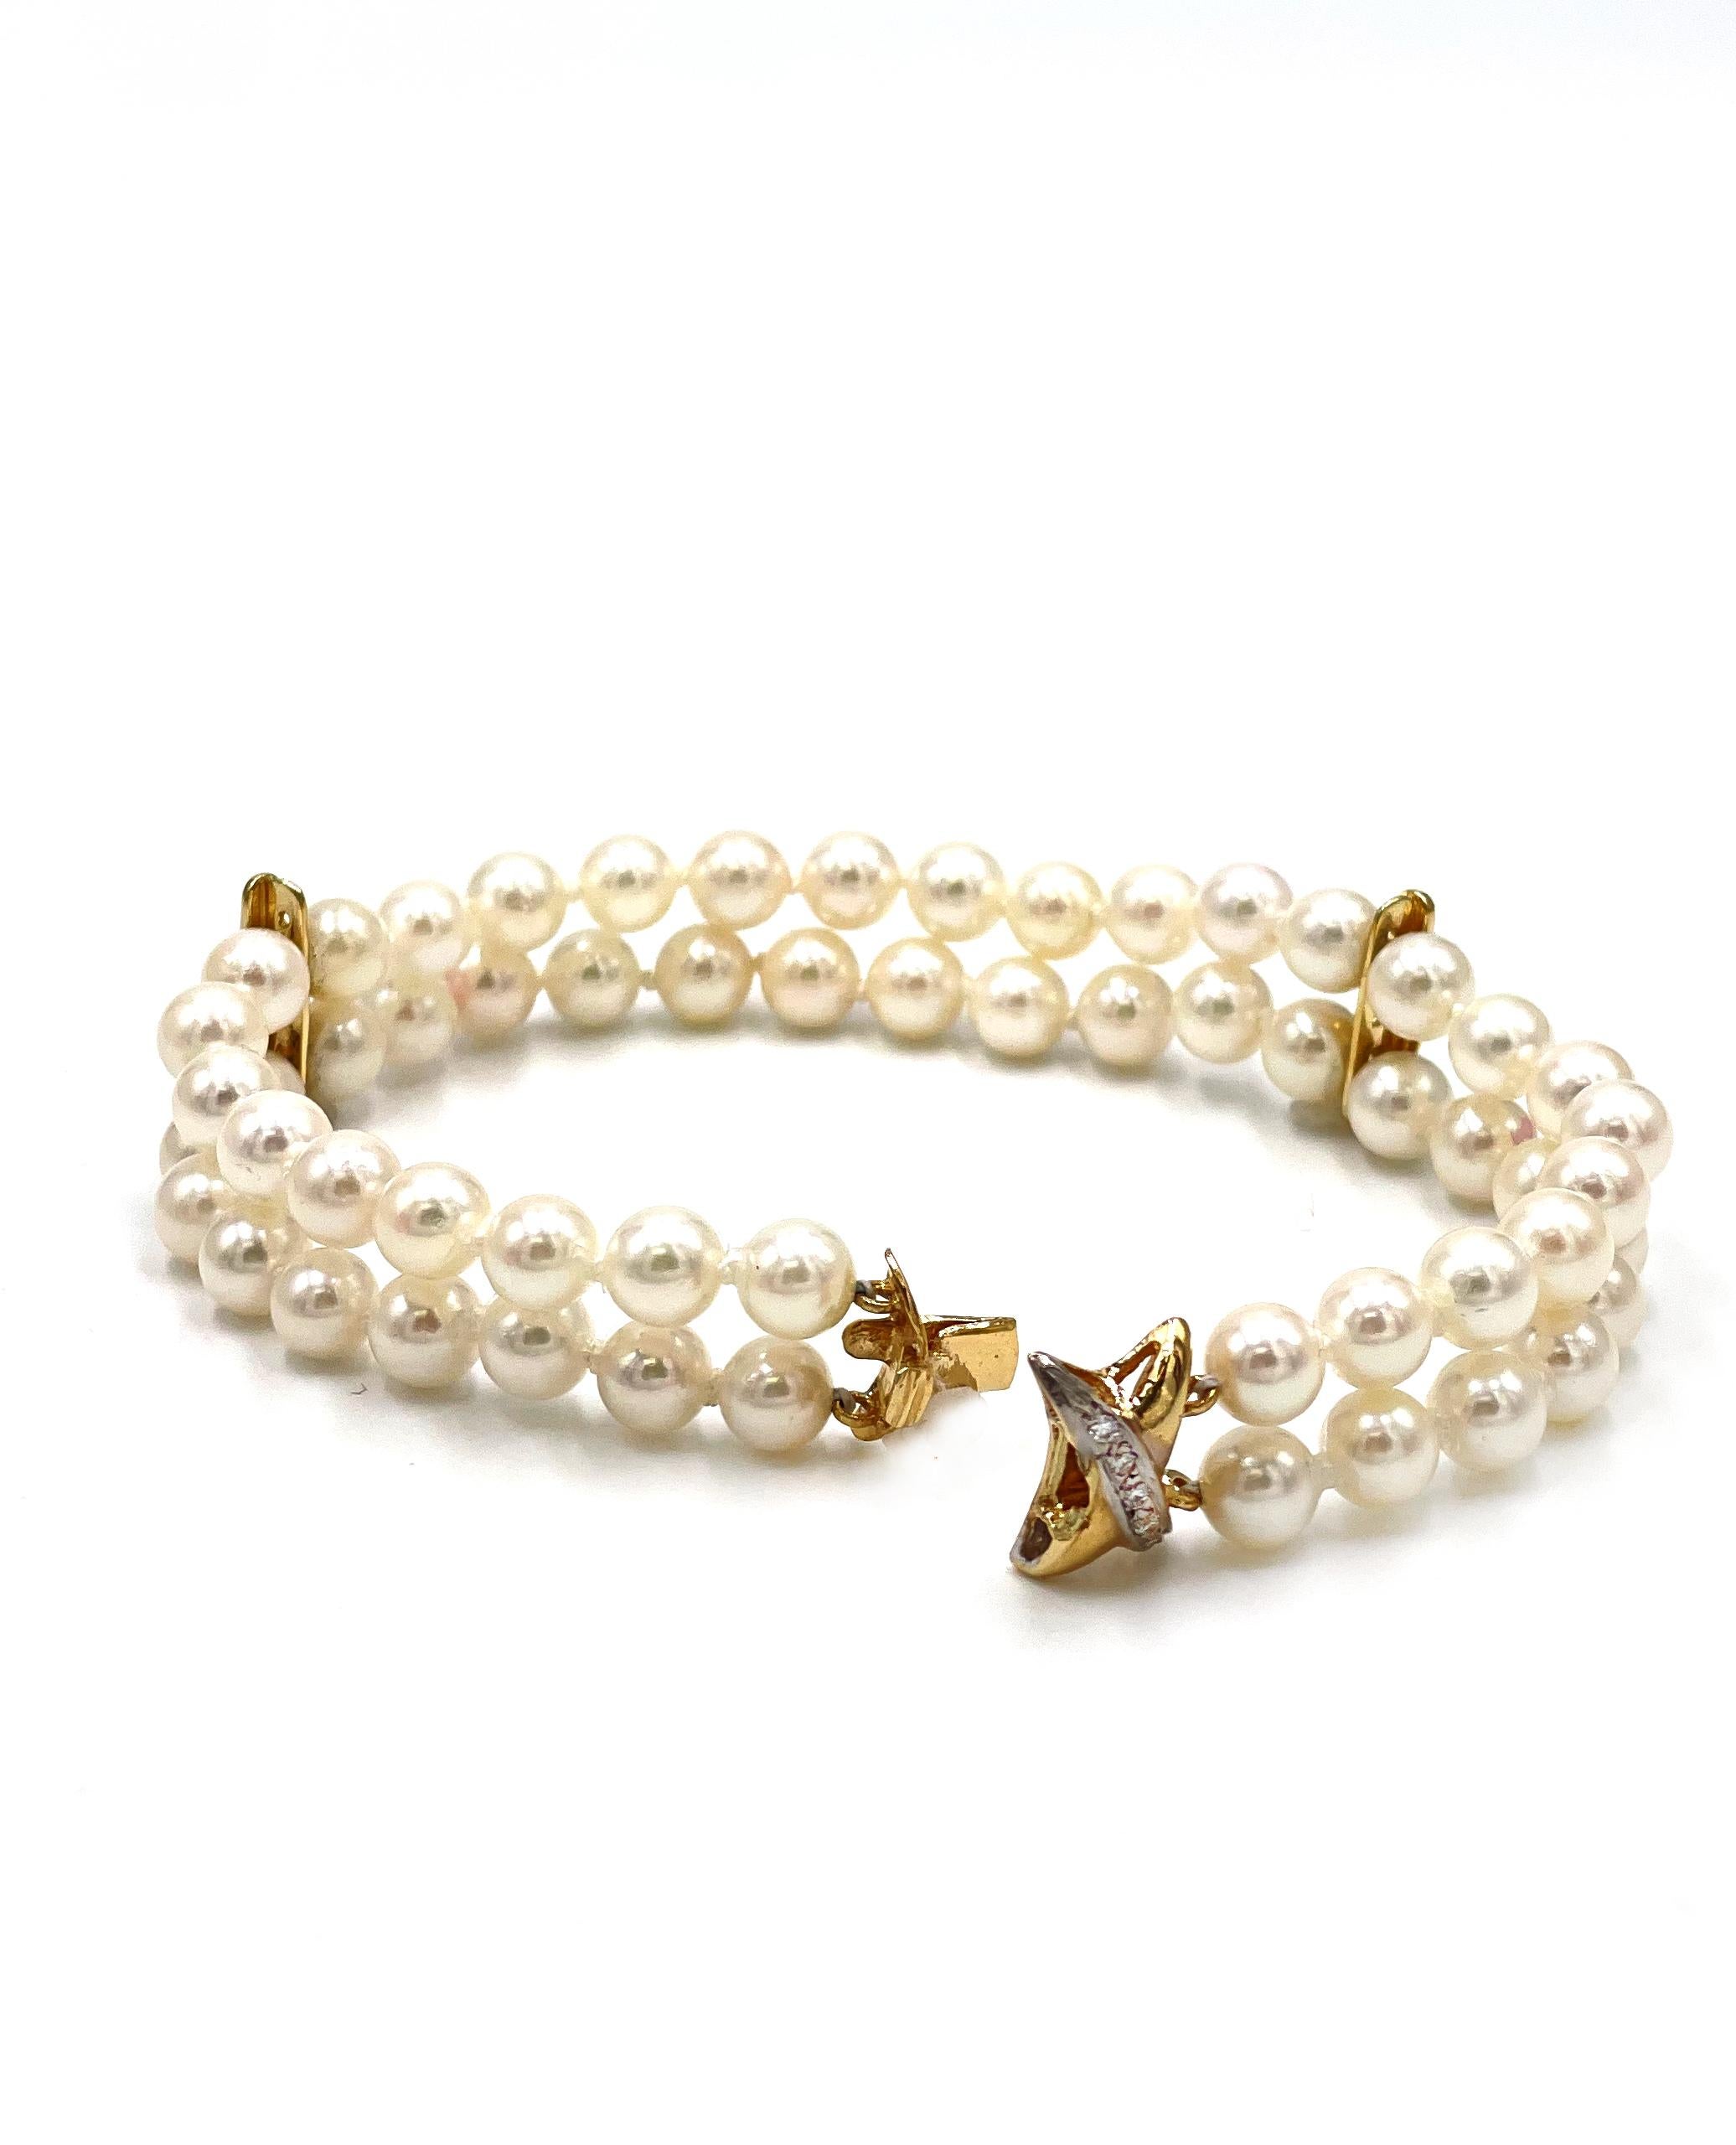 Double strand cultured pearl bracelet with 14k yellow gold spacers and 